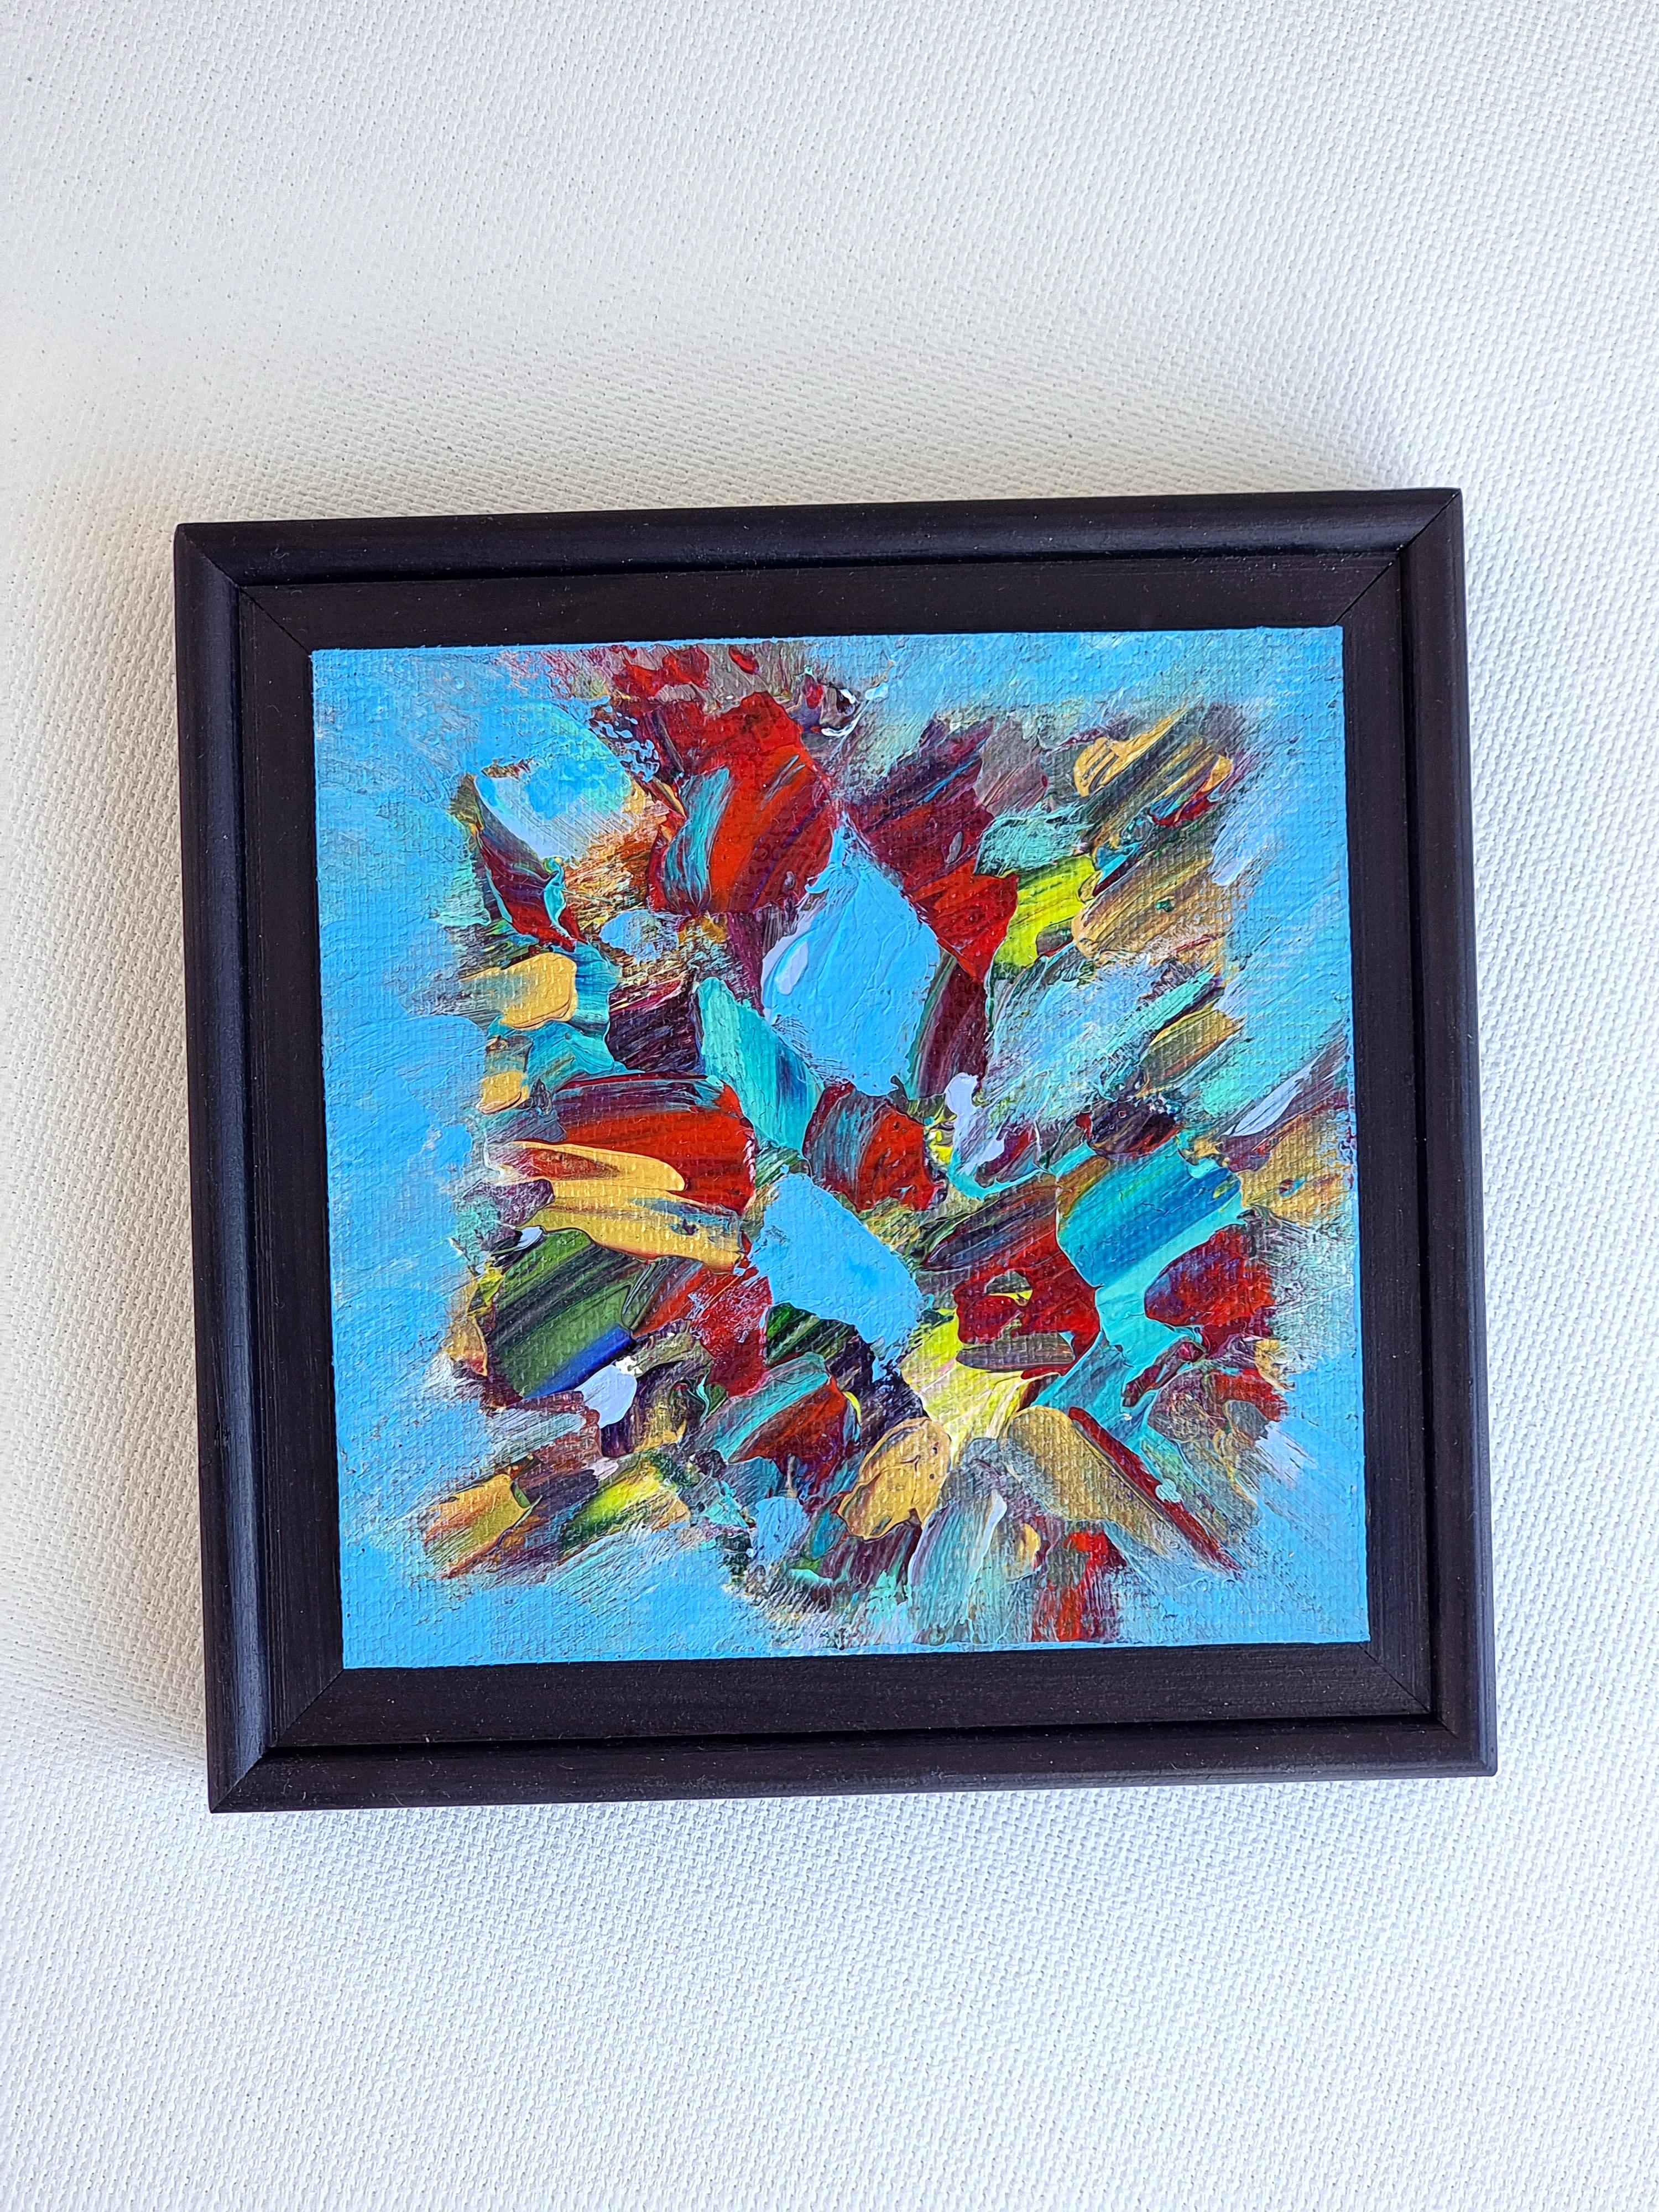 My new series for gift- mini abstractions with wooden frame. Bright, colorful minis with strong energy will be a great gift idea for yourself or some special people. You can just put them on a table or hand on the wall.
It will suit any contemporary